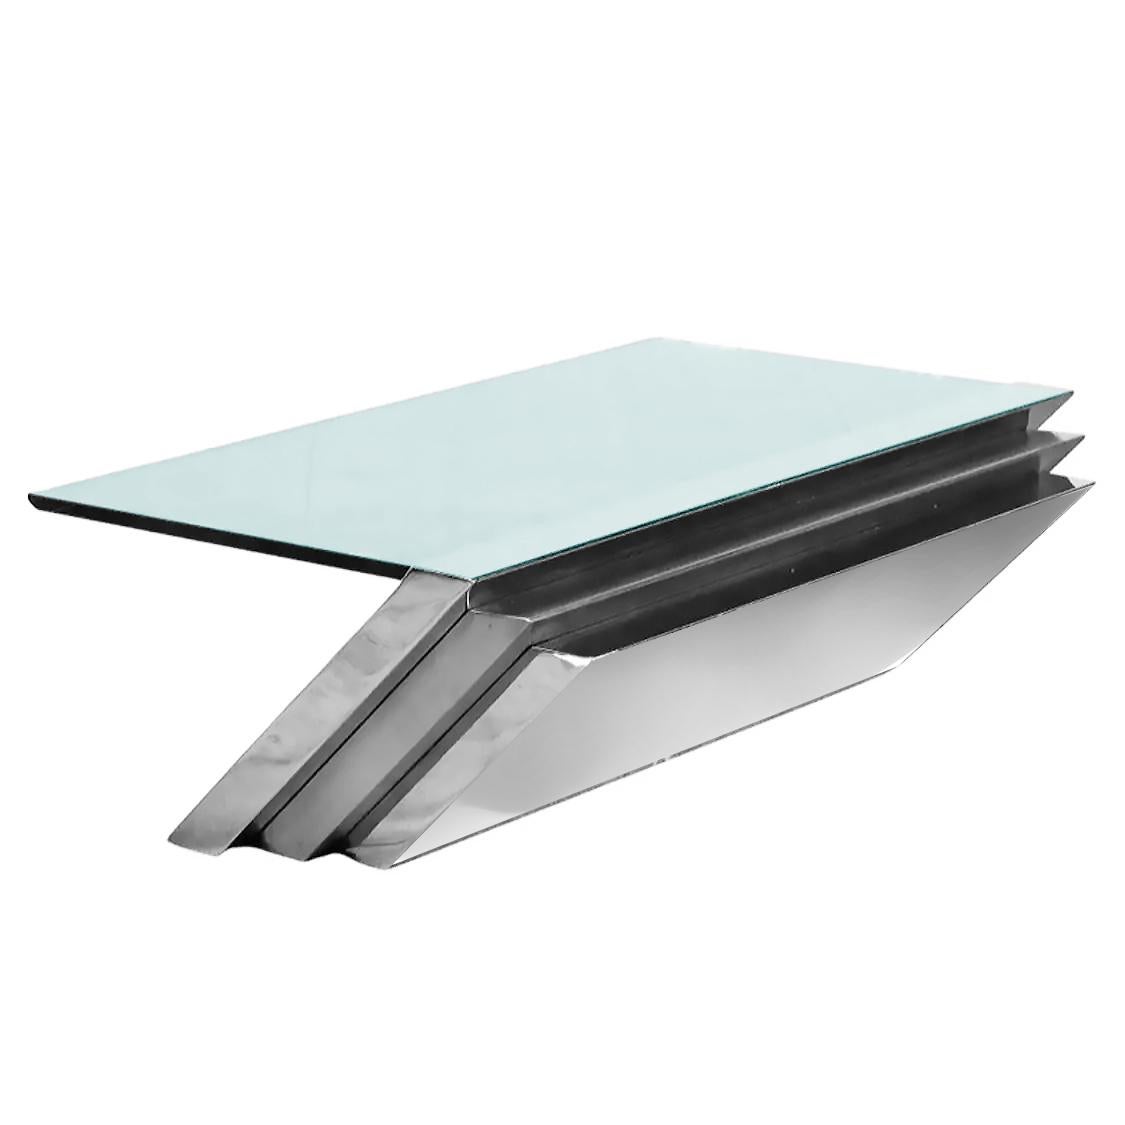 Post Modern Wade Beam Brueton Cantilevered Coffee Table in chrome

Offered for sale is a 1990s post-modern chrome and polished beveled cantilevered glass coffee table by J. Wade Beam for Brueton of New York.
The substantial table appears to defy